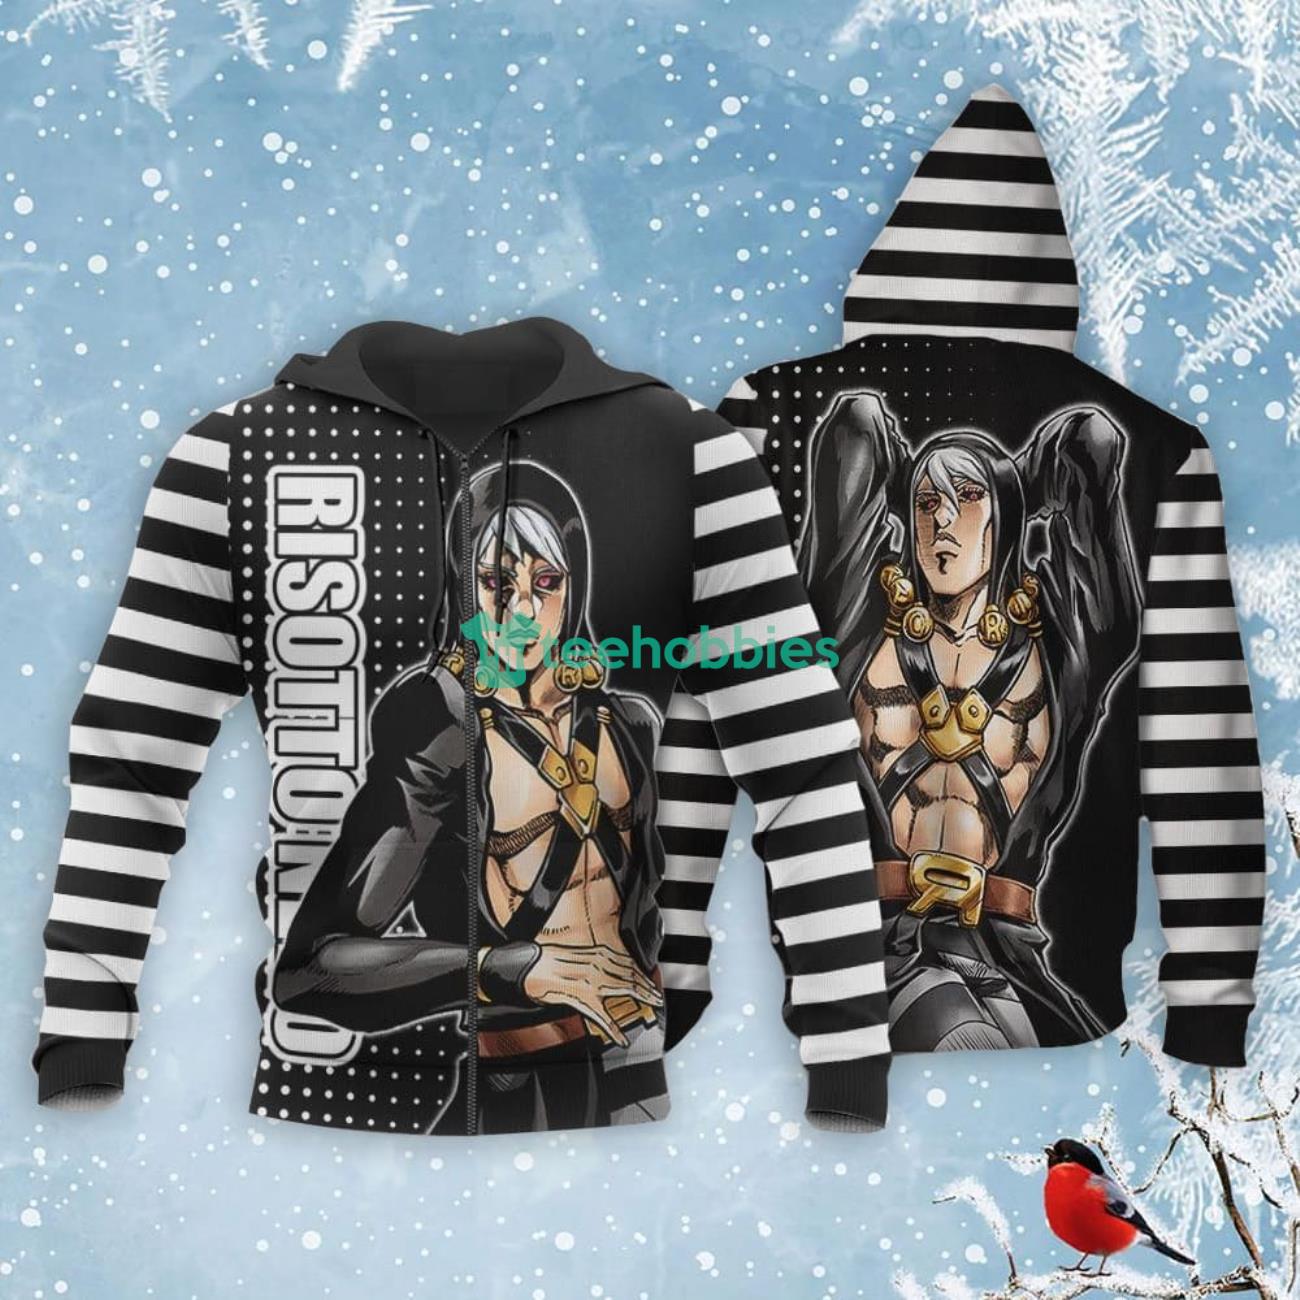 Risotto Nero All Over Printed 3D Shirt Custom Anime Fans JJBAs Product Photo 1 Product photo 1